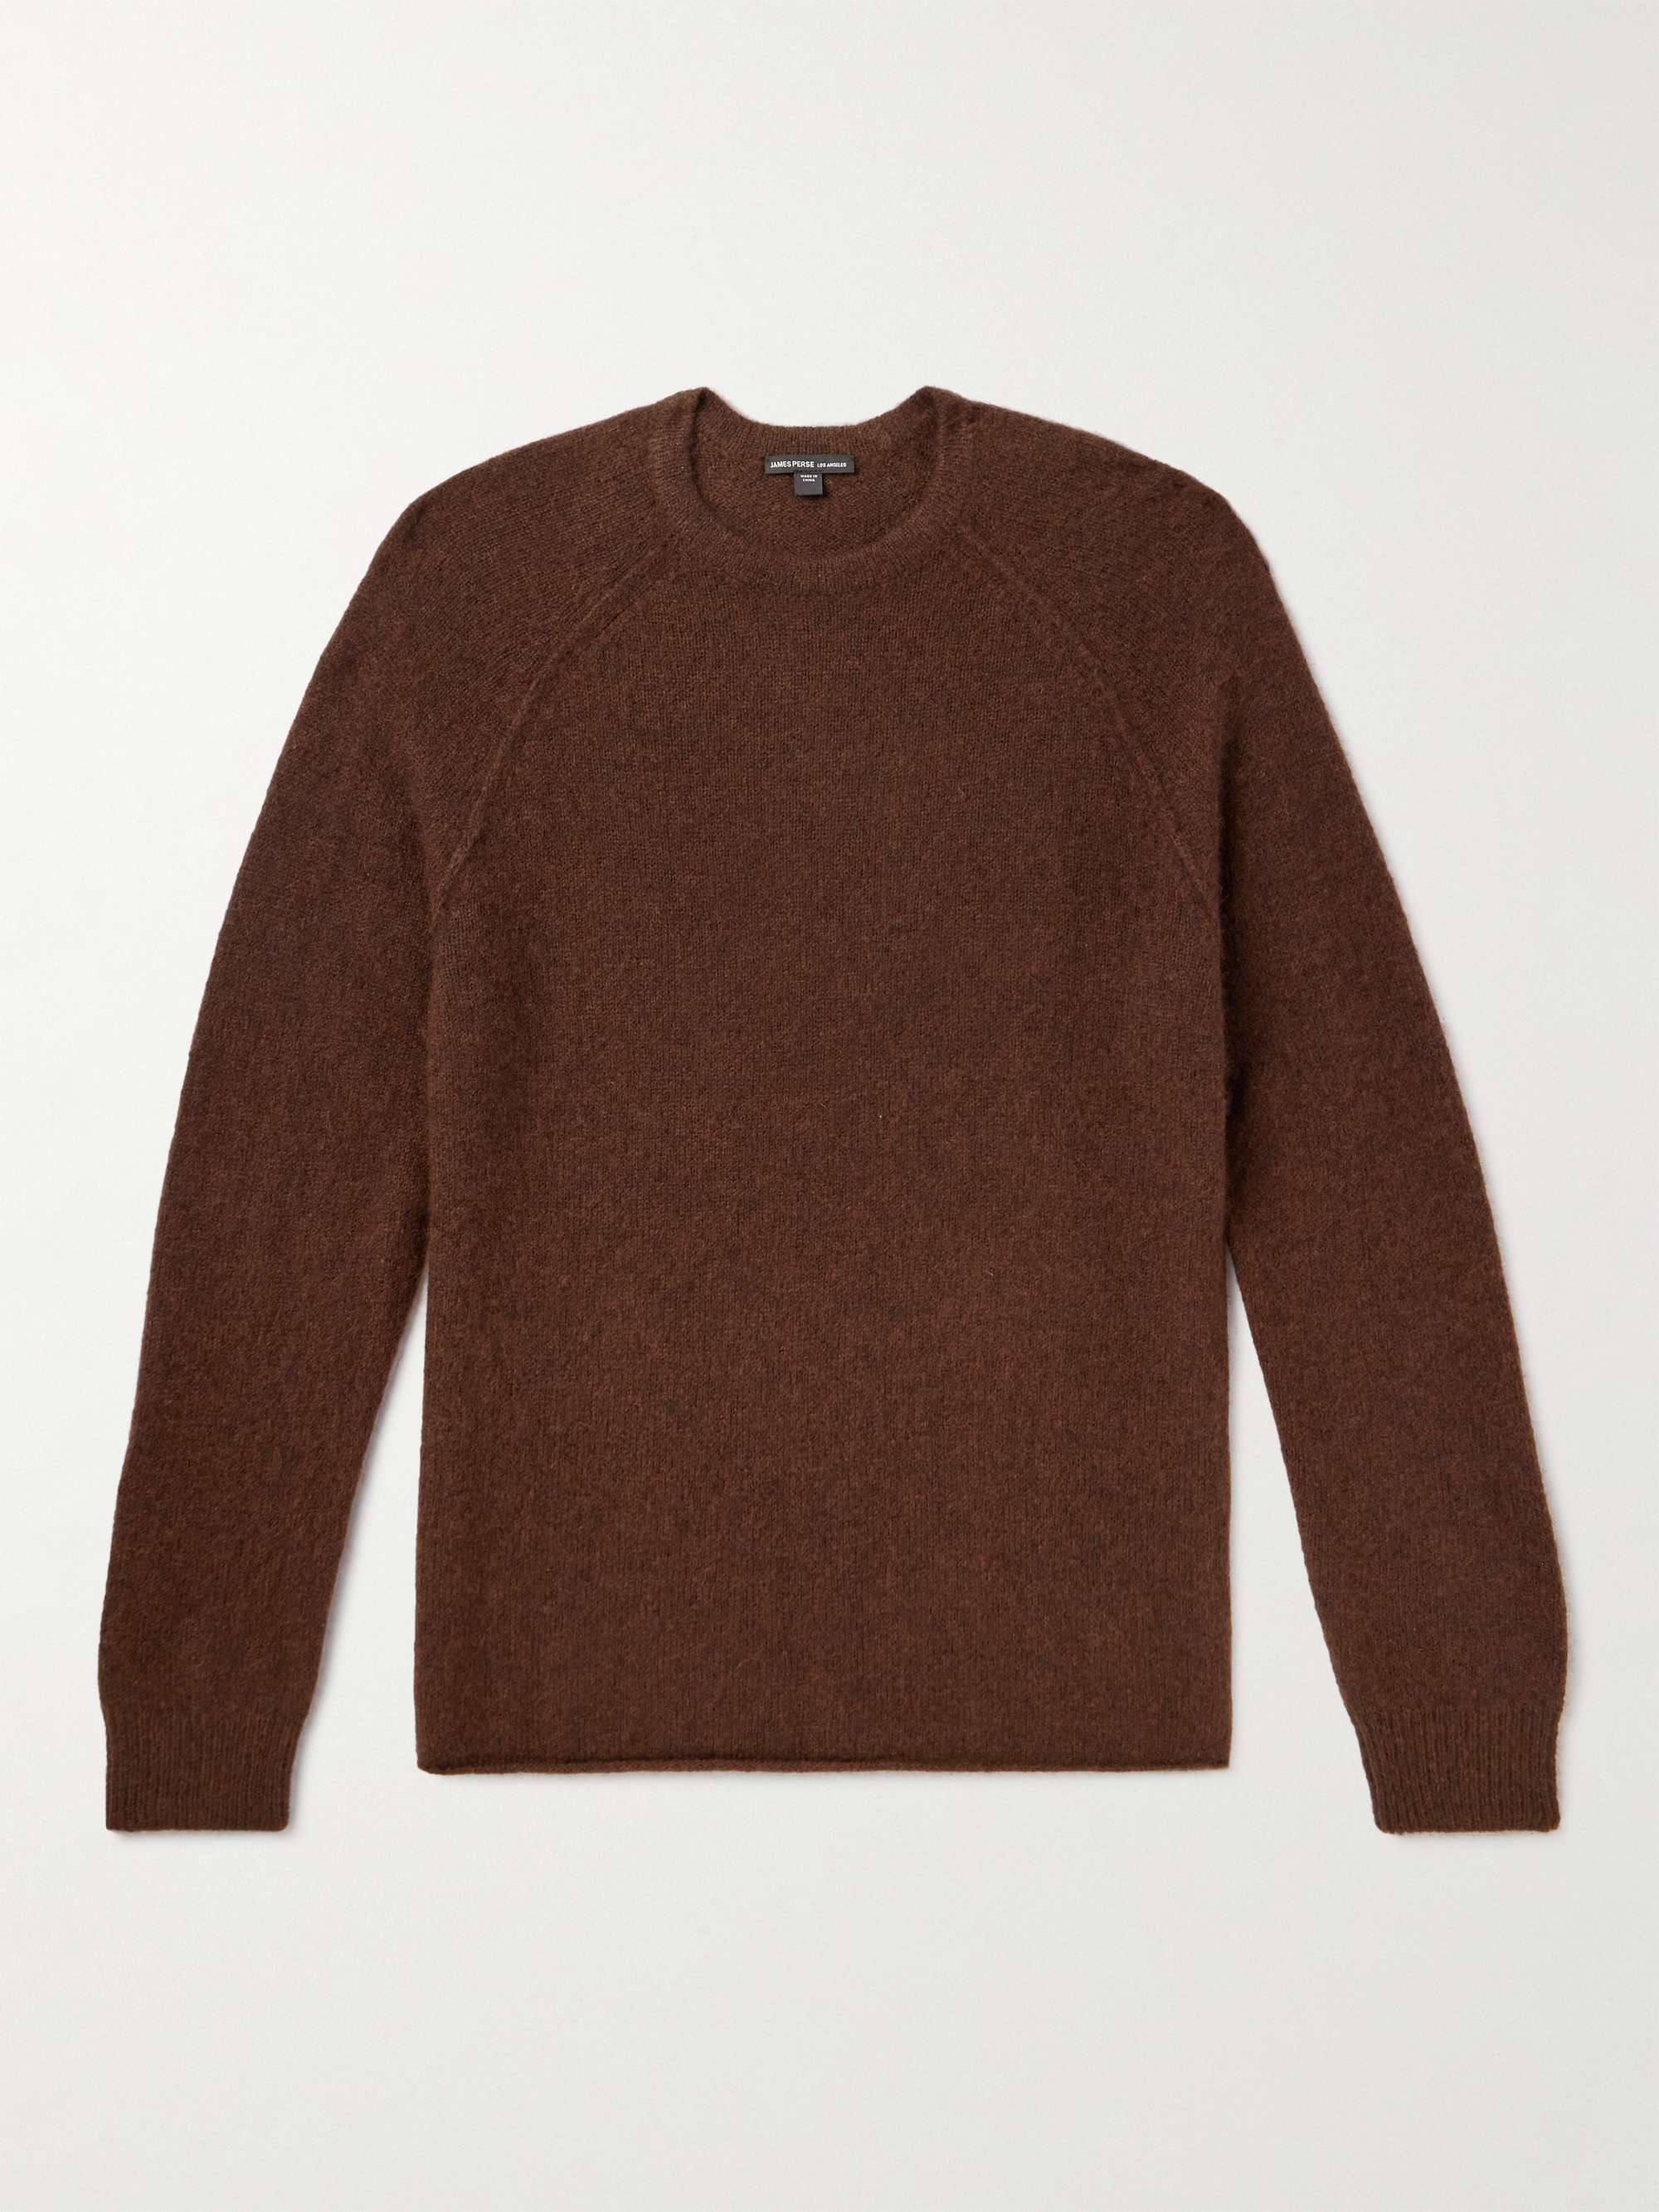 JAMES PERSE Cashmere Sweater